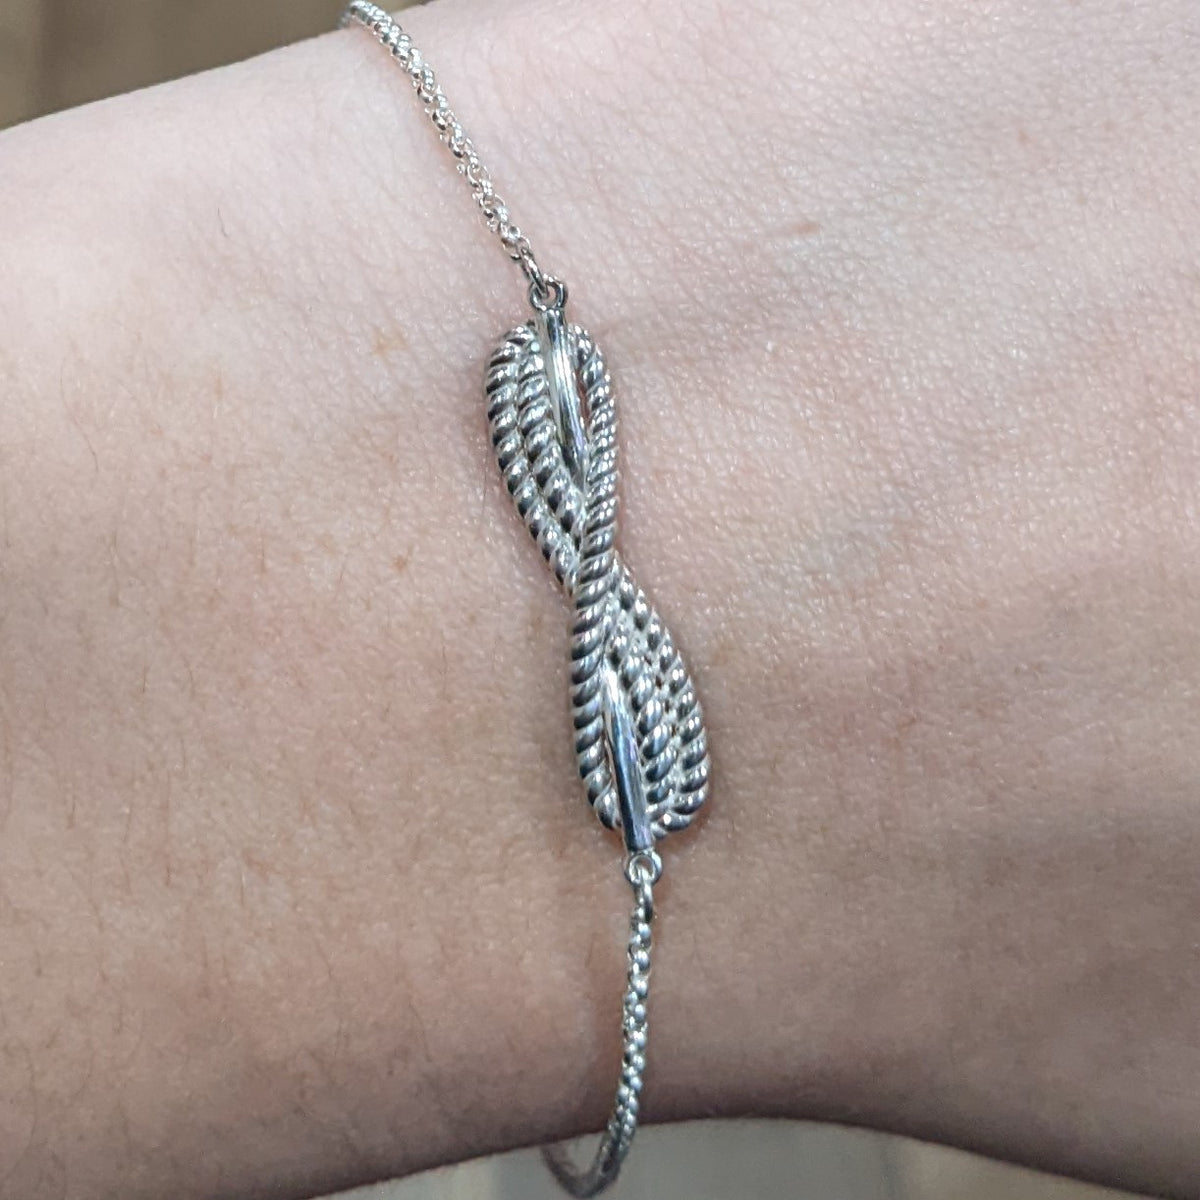 How to tie a half hitch knot and square knot for your friendship bracelet –  Nbeads